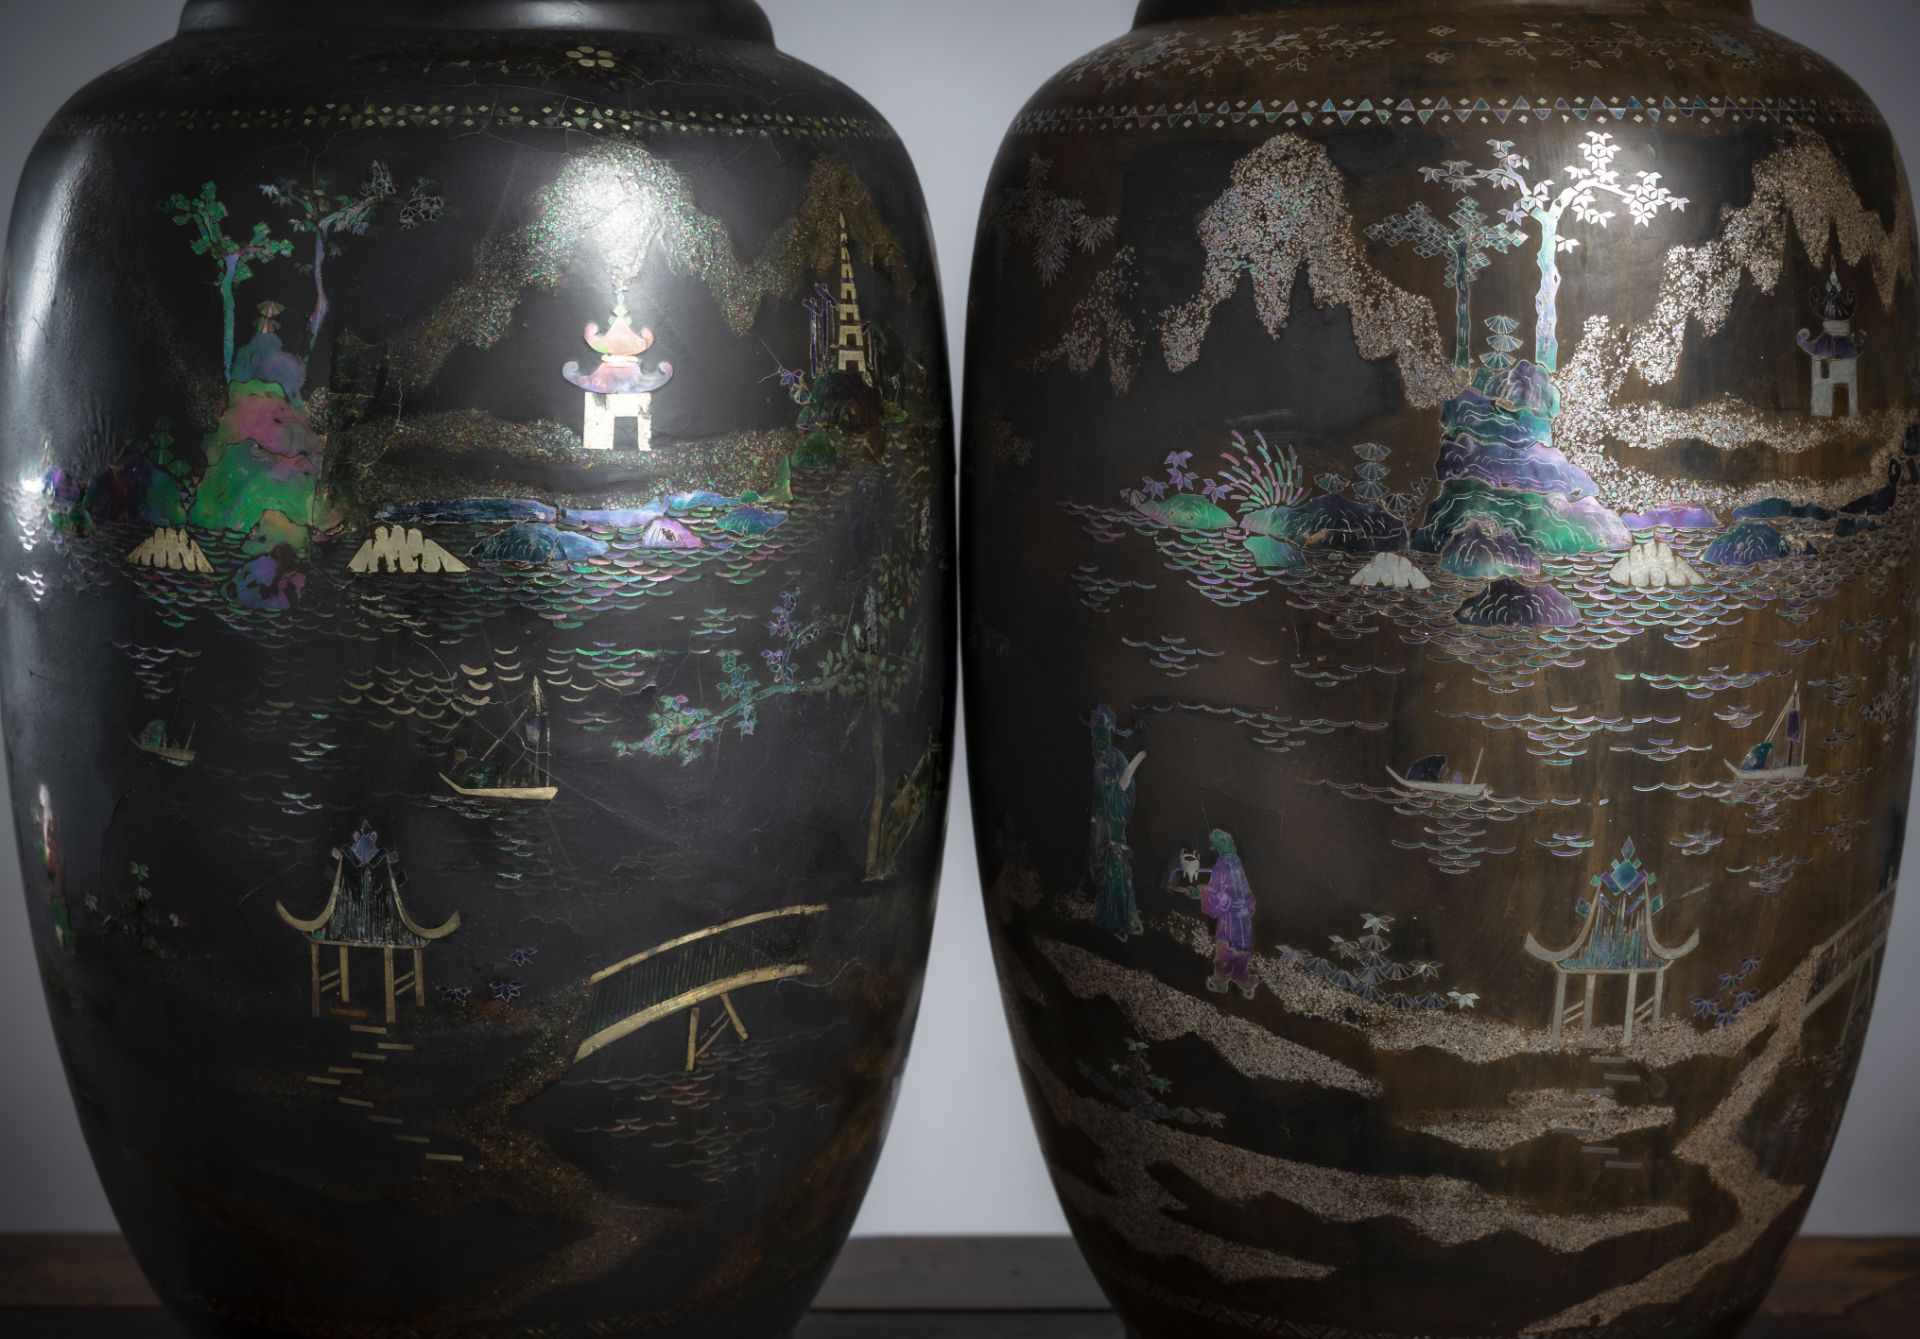 A VERY RARE AND LARGE PAIR OF LAC-BURGAUTÉ PORCELAIN VASES AND COVERS - Image 7 of 7